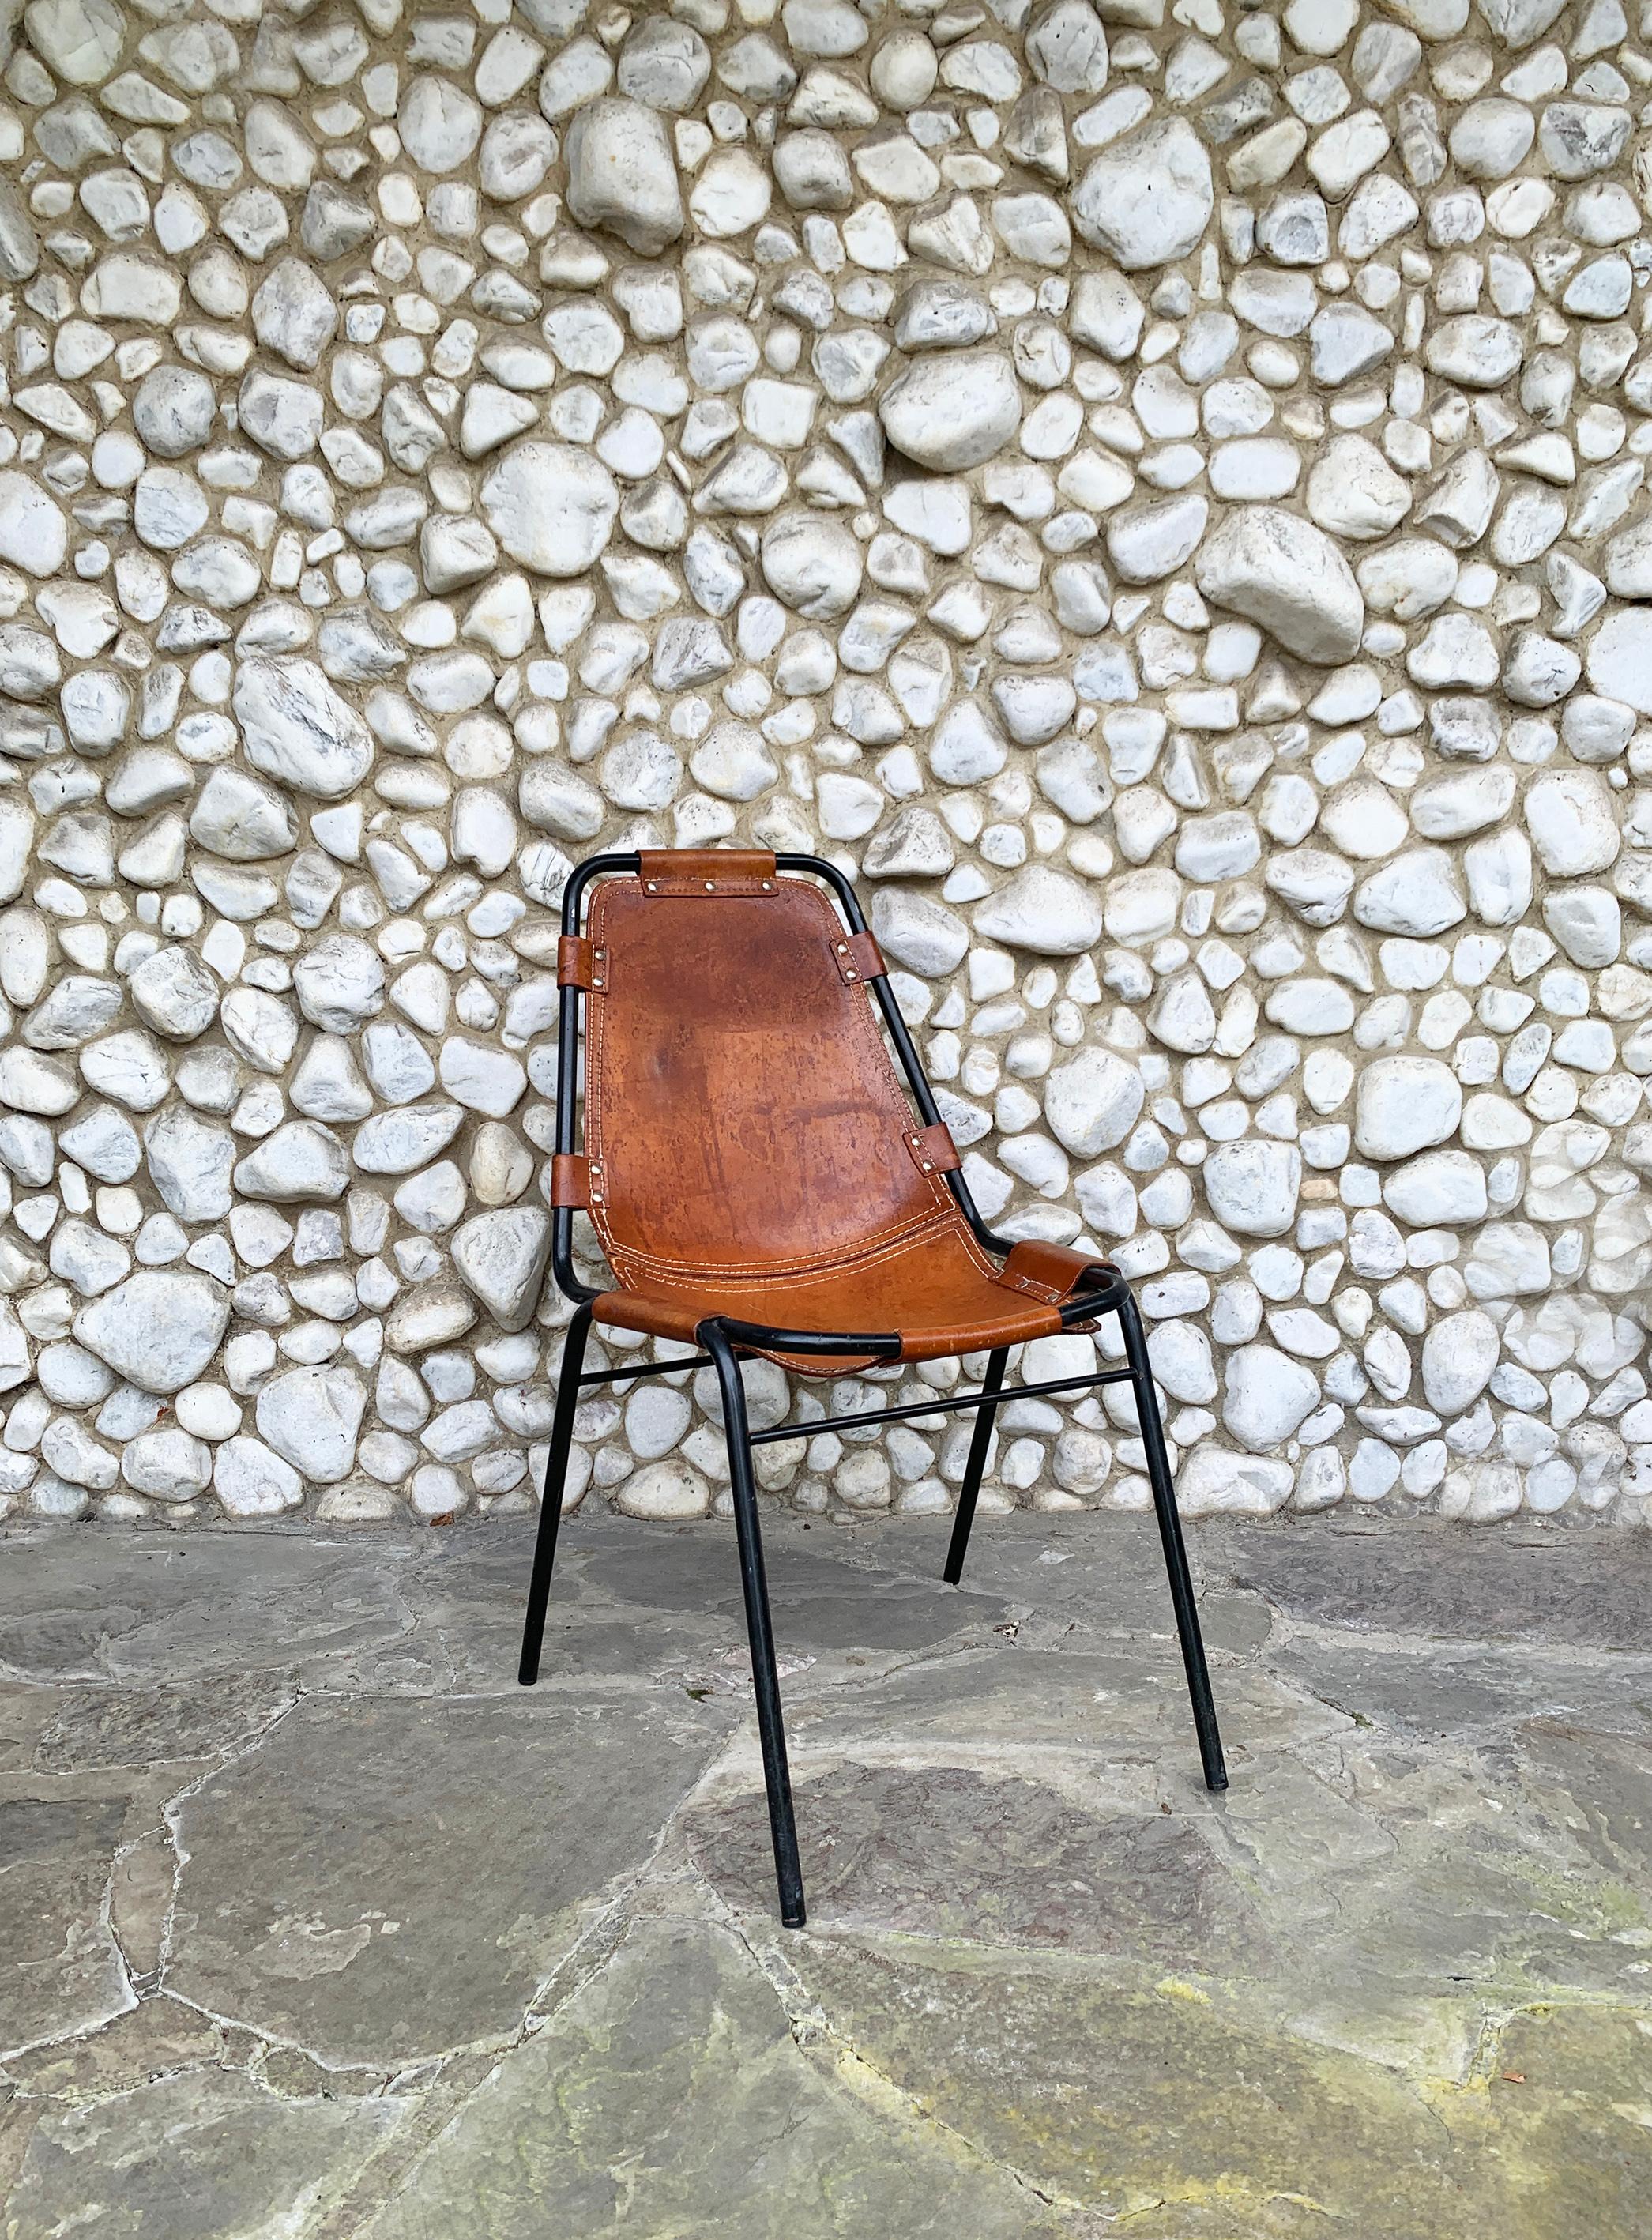 Dining chair commissioned / selected by Charlotte Perriand for the interior design of the appartements of 'Les Arcs' Ski Resorts in the French Alps.

Chromed tubular frame in metal painted black with thick brown leather seat.

The saddle leather has